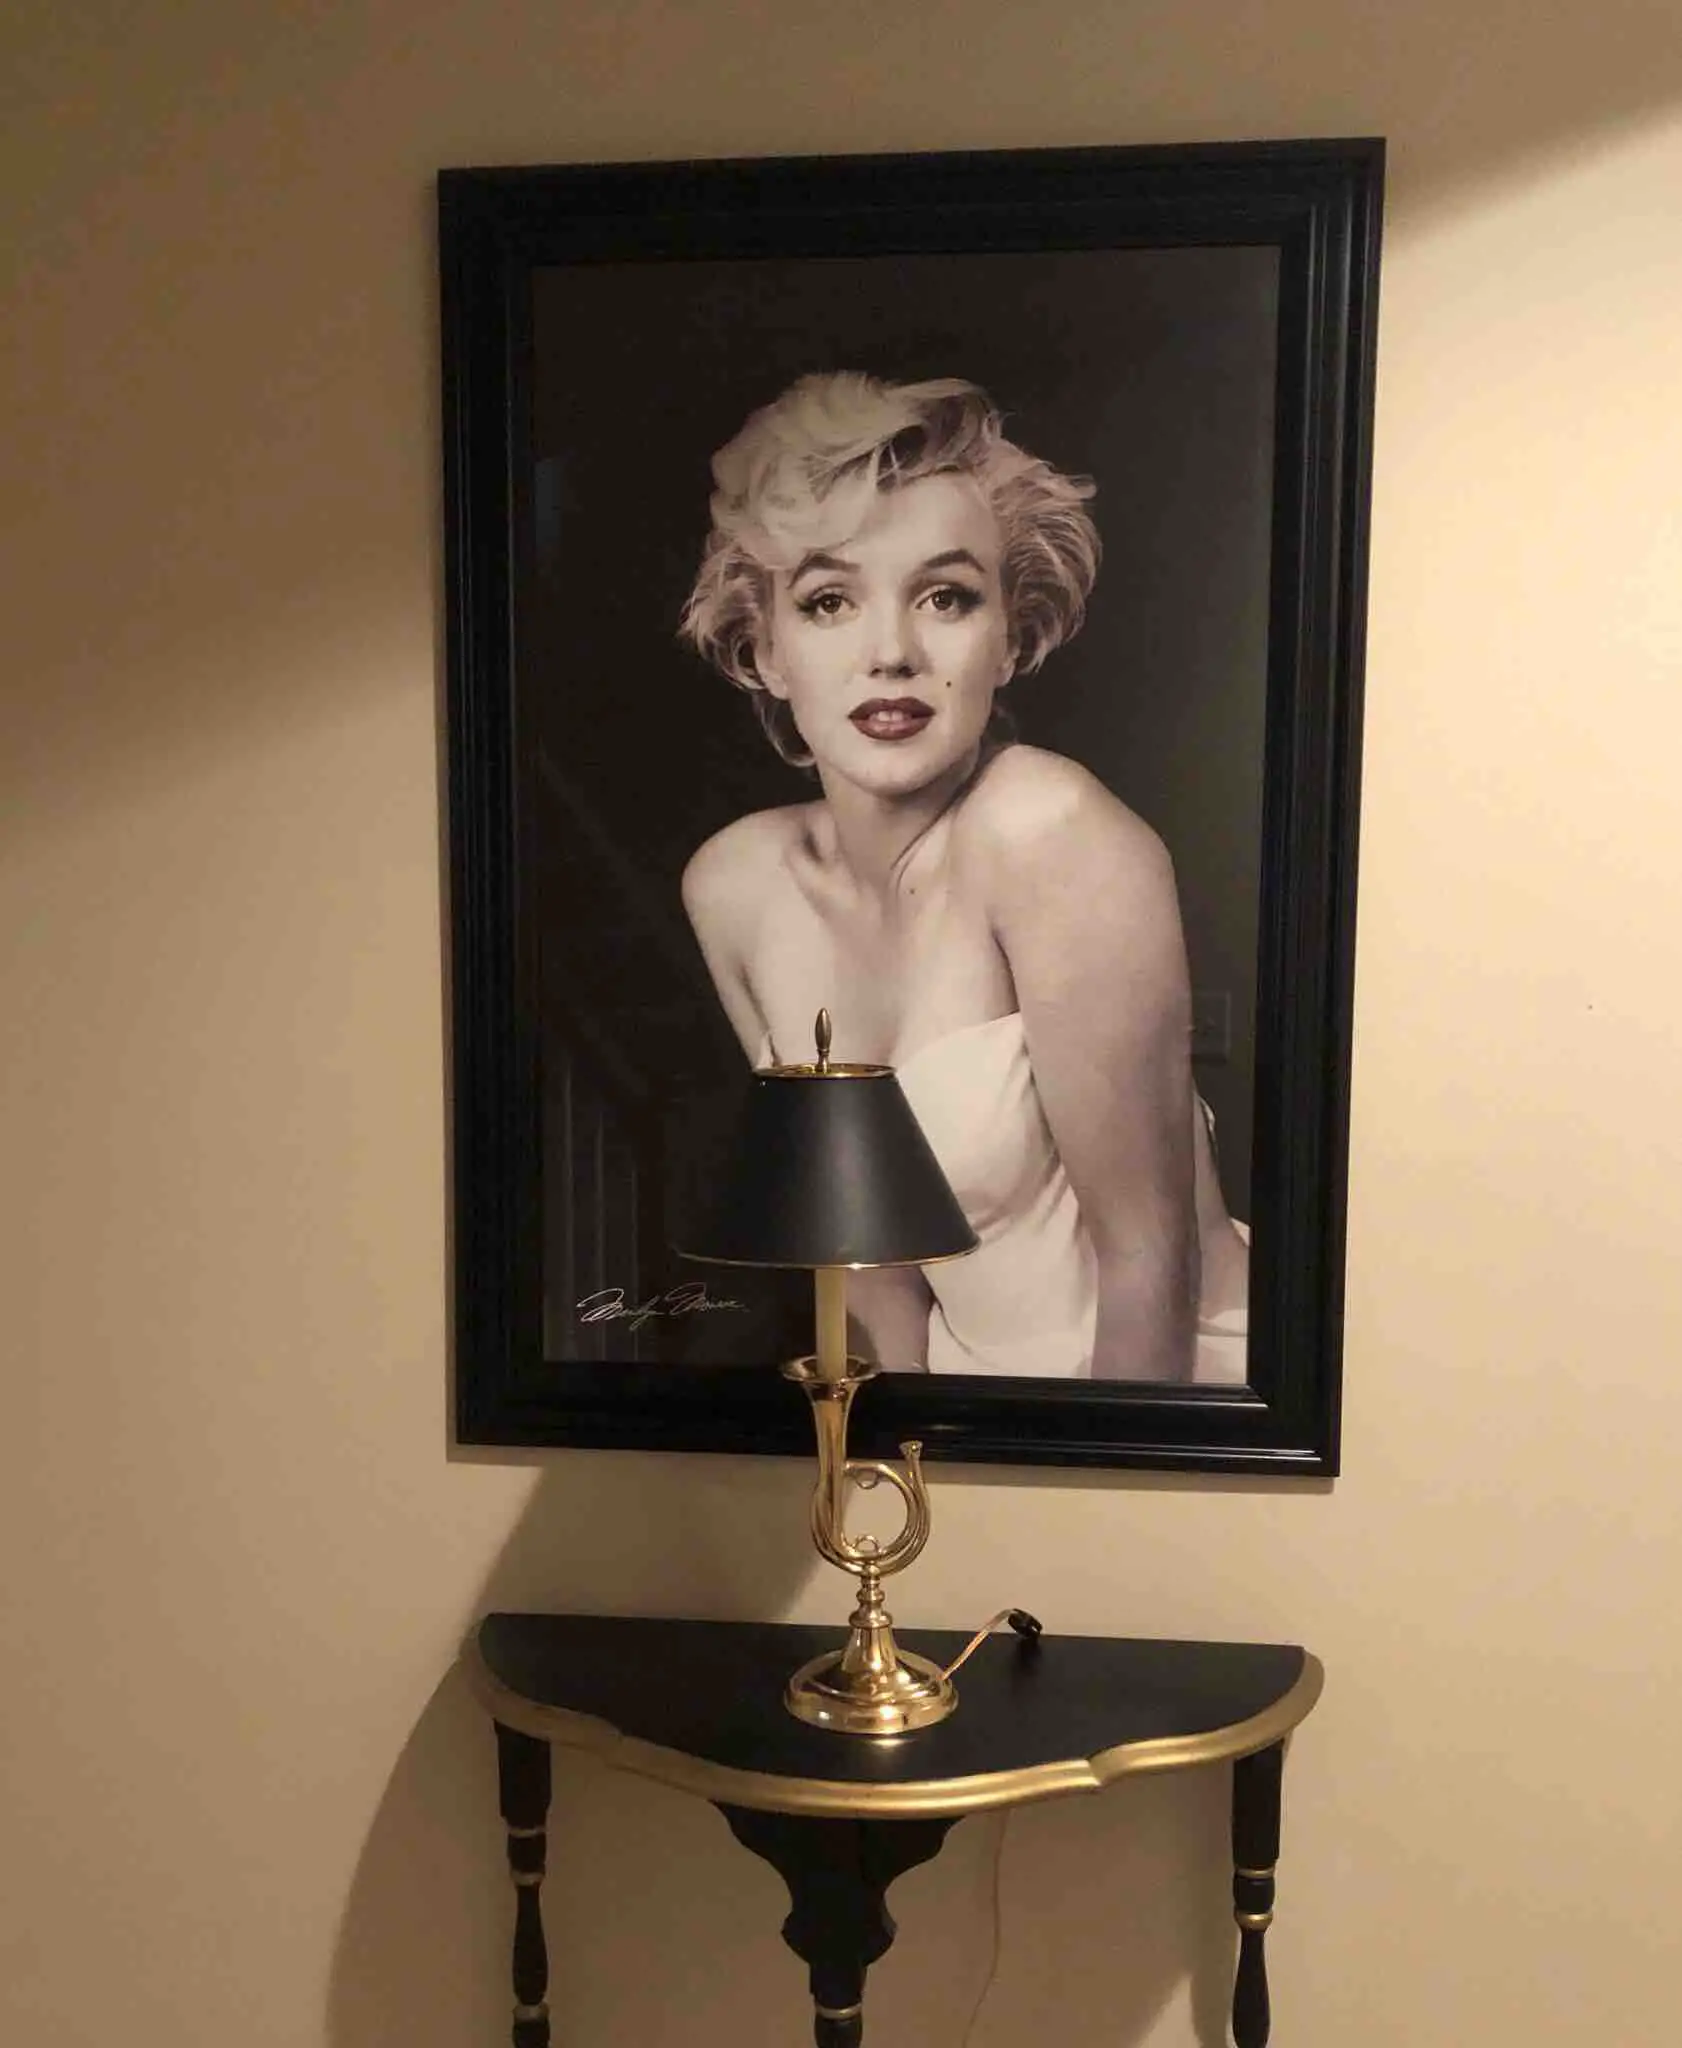 Marilyn Monroe Art Work with Candle on Desk